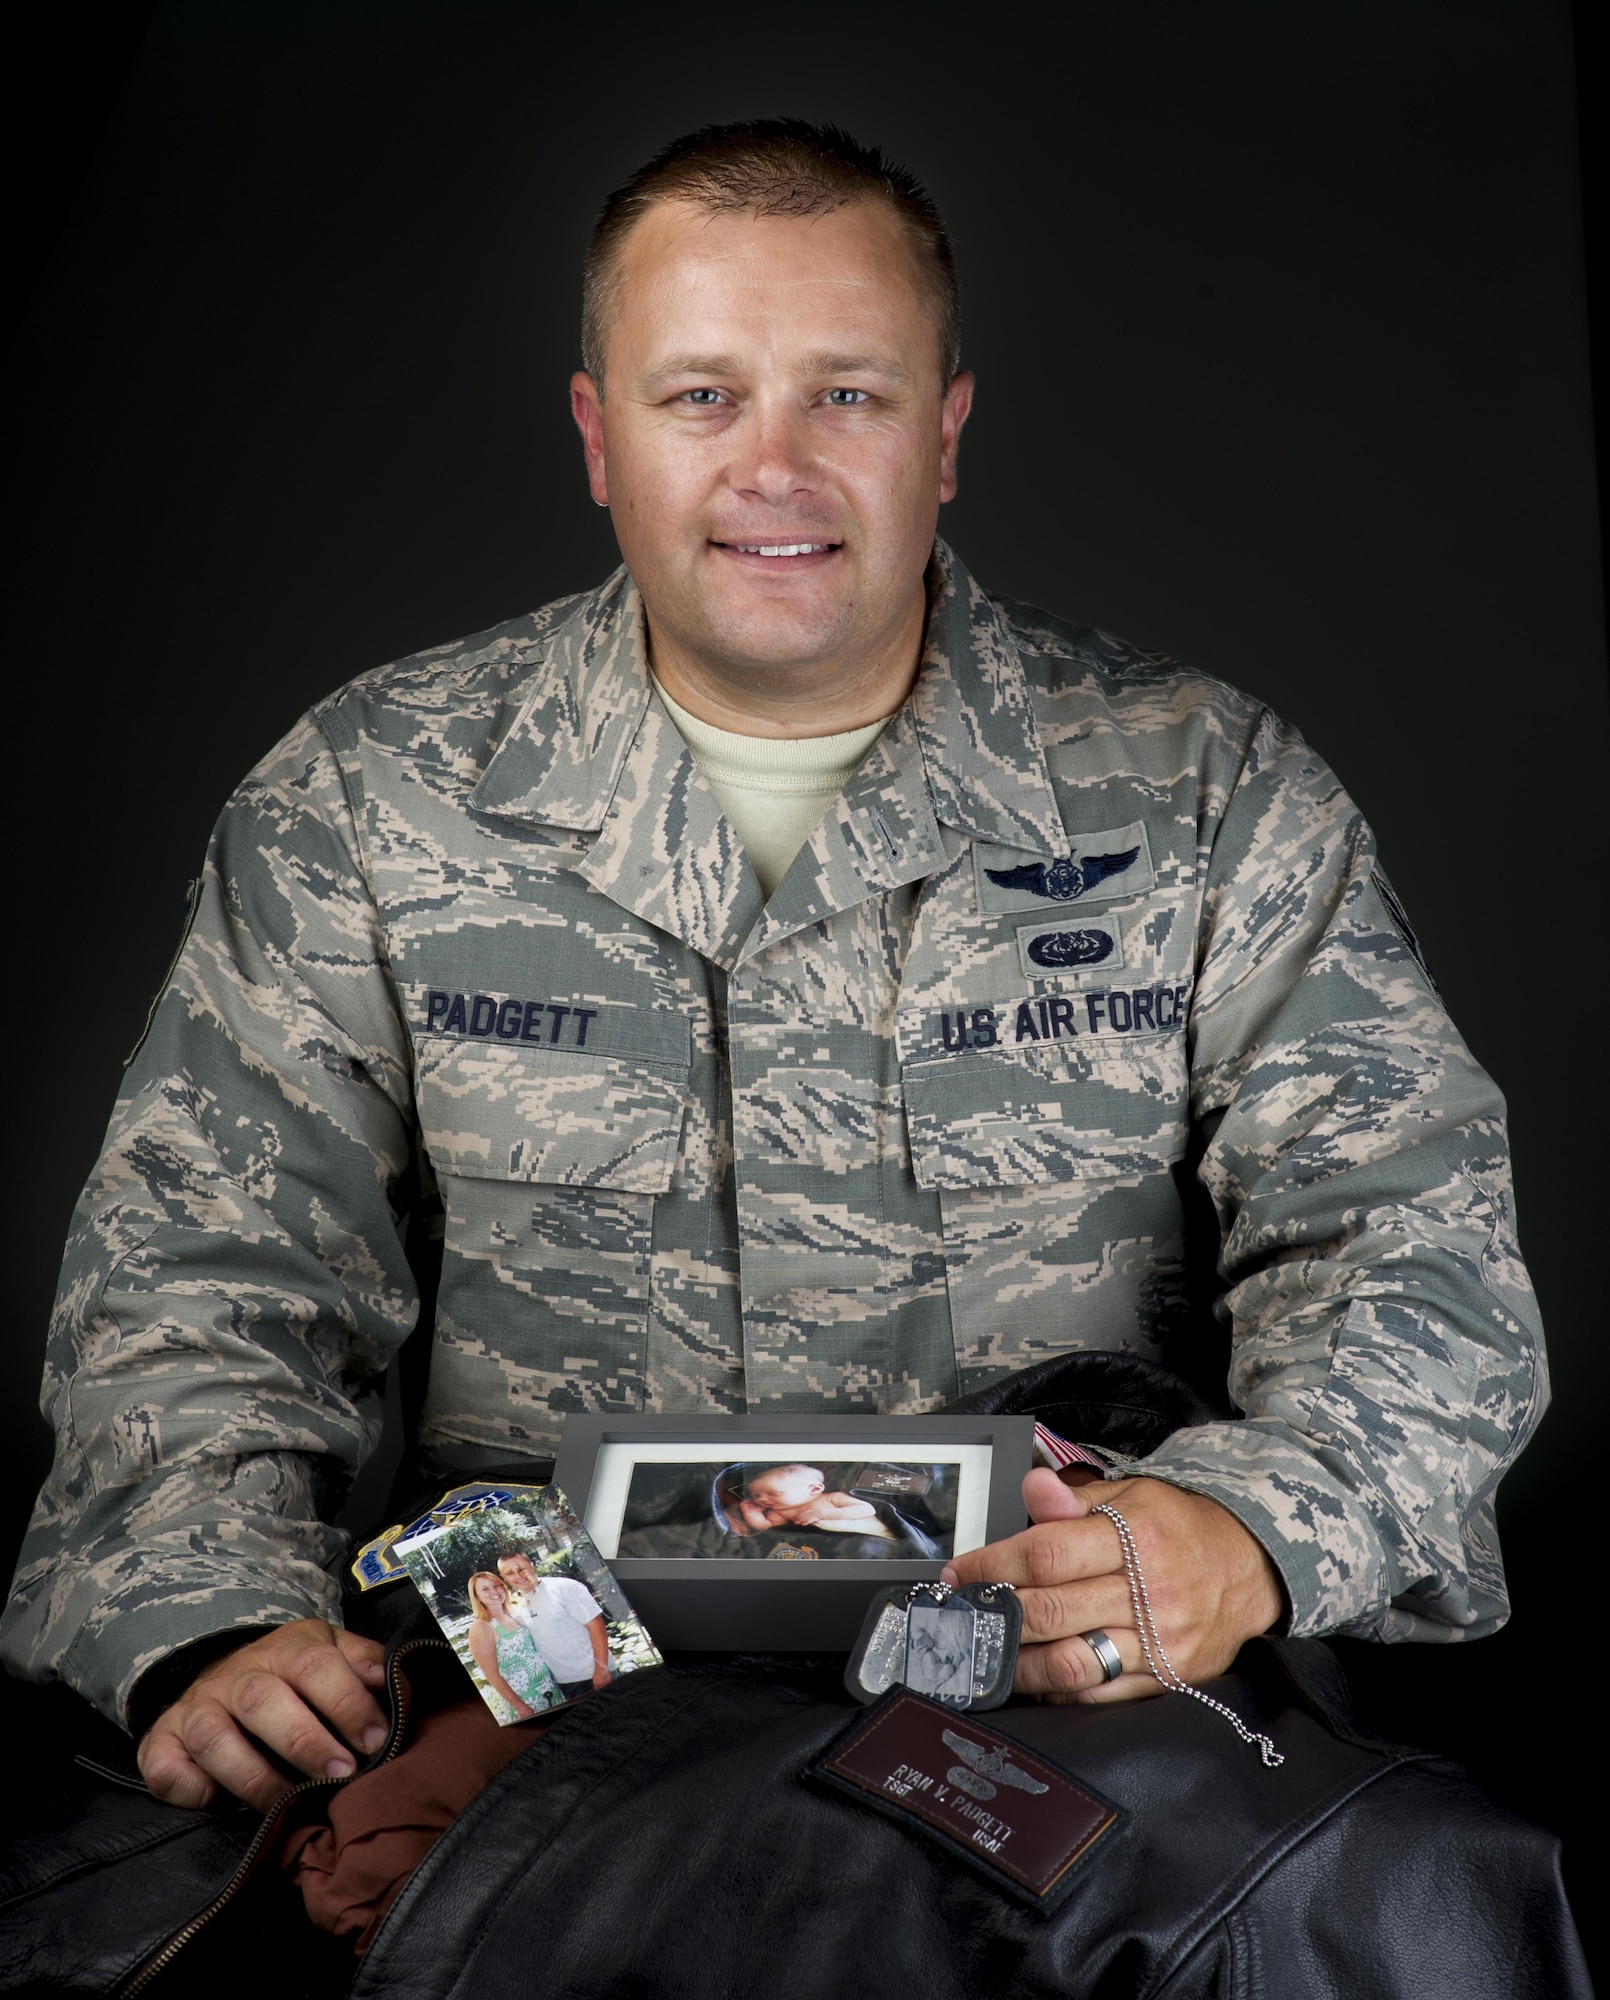 Tech. Sgt. Ryan Padgett, 570 Global Mobility Squadron unit training manager, displays the keepsakes that travel along with him on his worldwide missions, July 18, 2017. Men and women serving their country in all branches of the military have traditionally kept meaningful mementos or talismans close to them for good luck, as reminders, to bring comfort or other deeply felt personal reasons. Digitaly altered for security reasons. SSN blurred in camera RAW. (U.S. Air Force photo Illustration/Heide Couch)